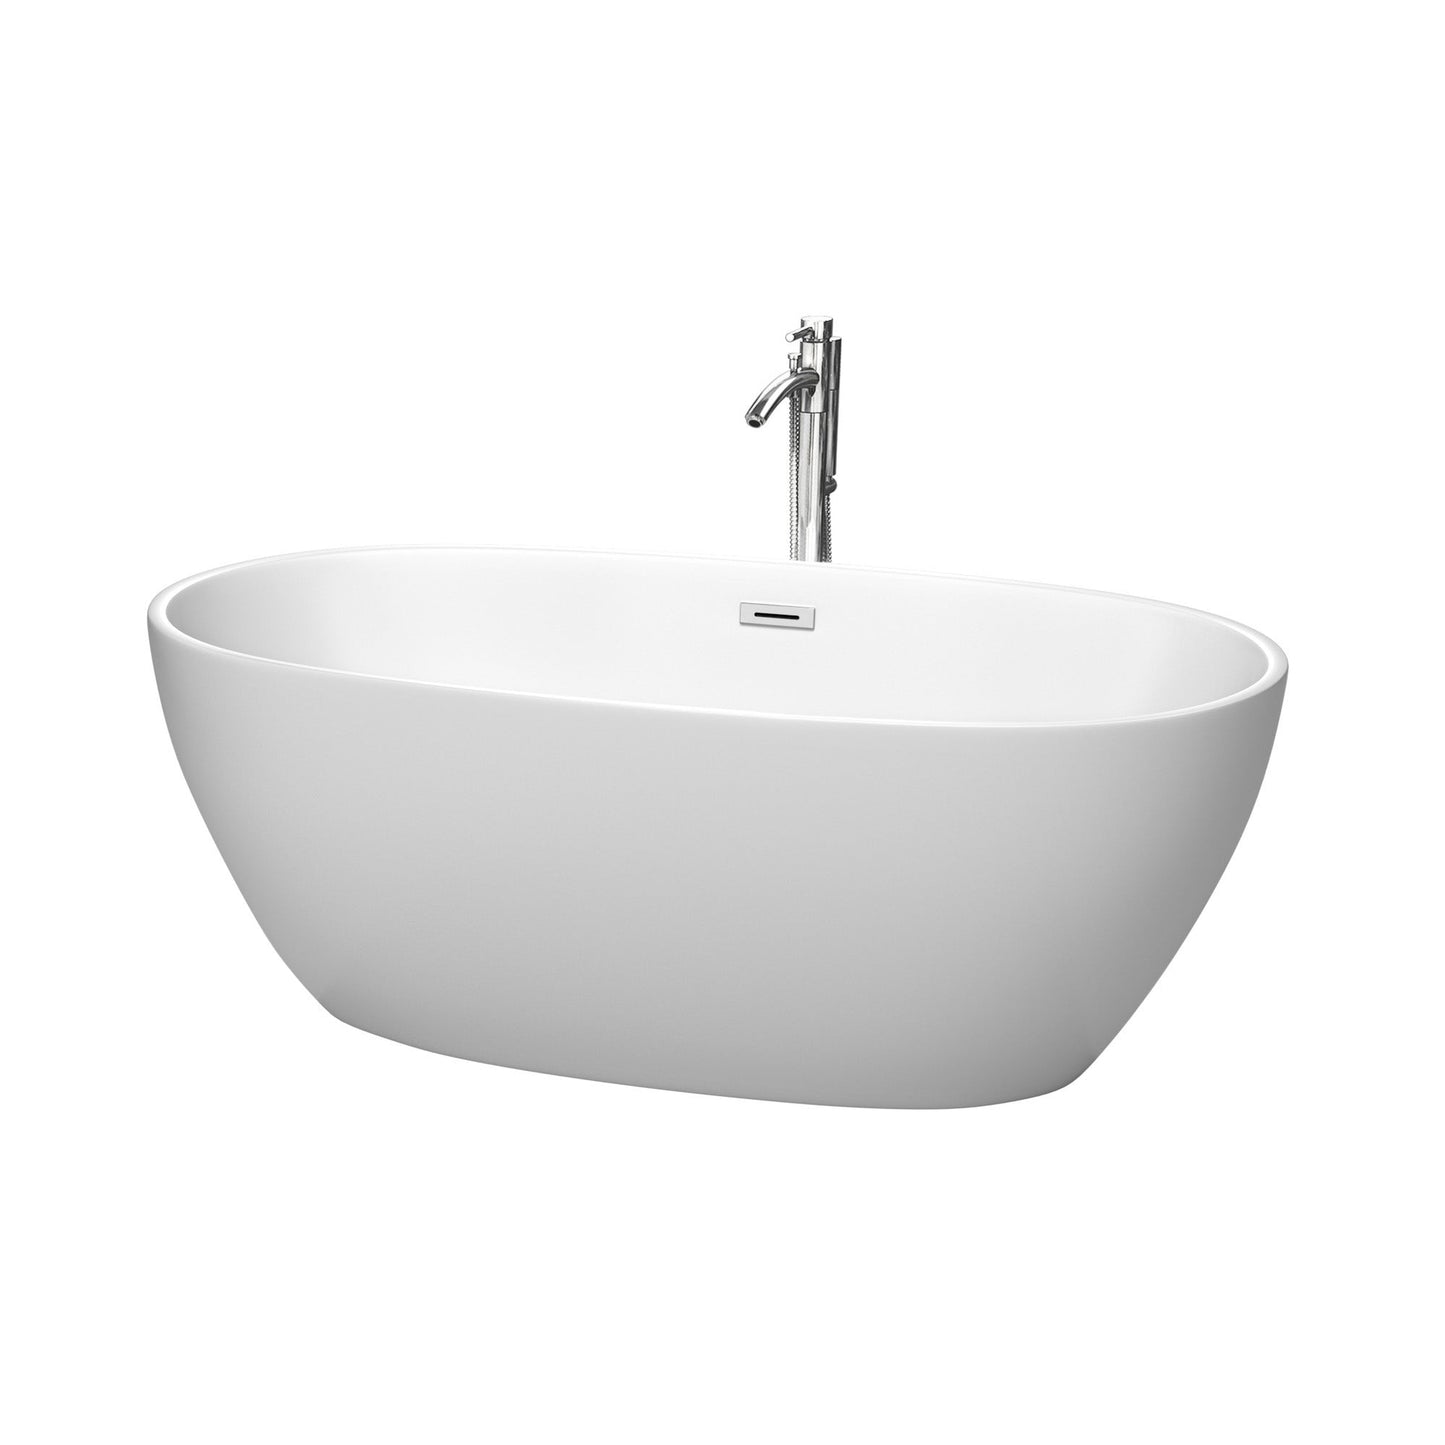 Wyndham Collection Juno 63" Freestanding Bathtub in Matte White With Floor Mounted Faucet, Drain and Overflow Trim in Polished Chrome